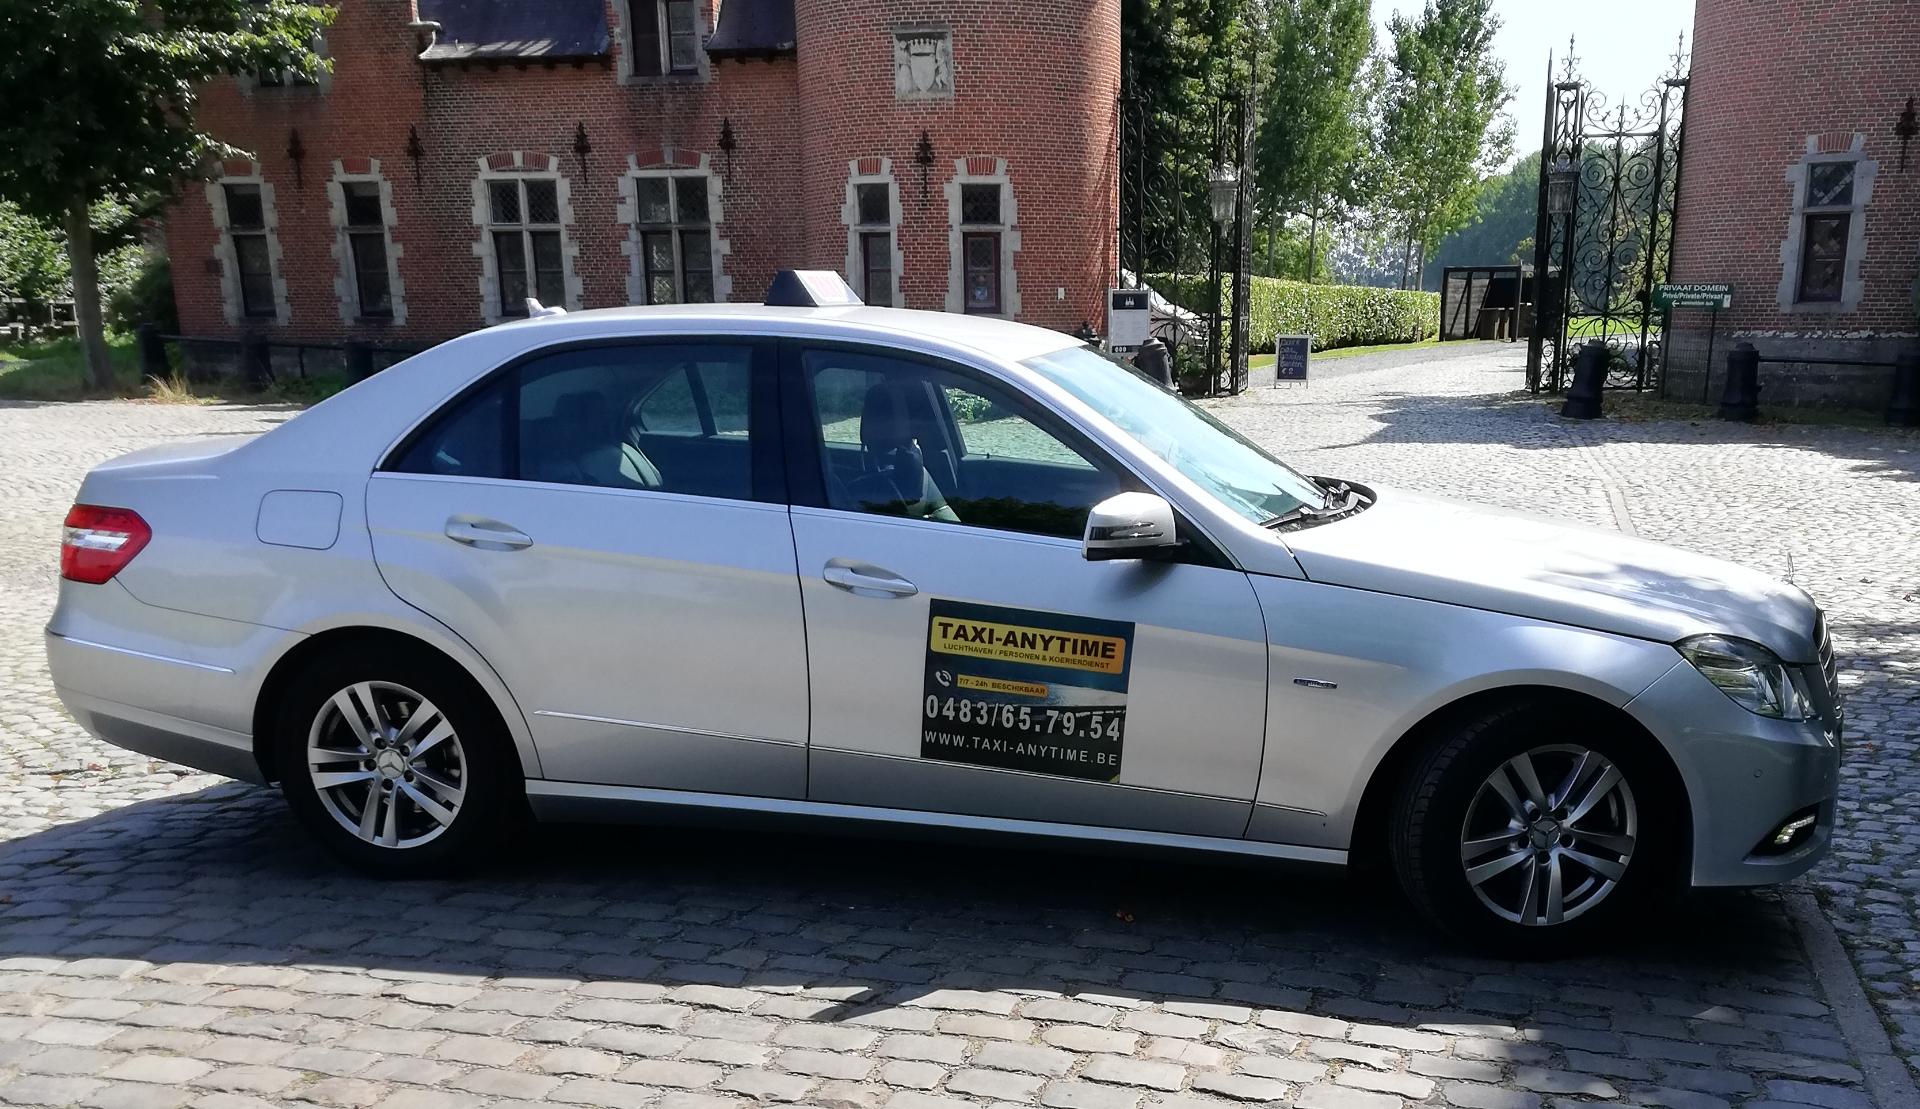 autoverhuur Wommelgem Taxi Anytime